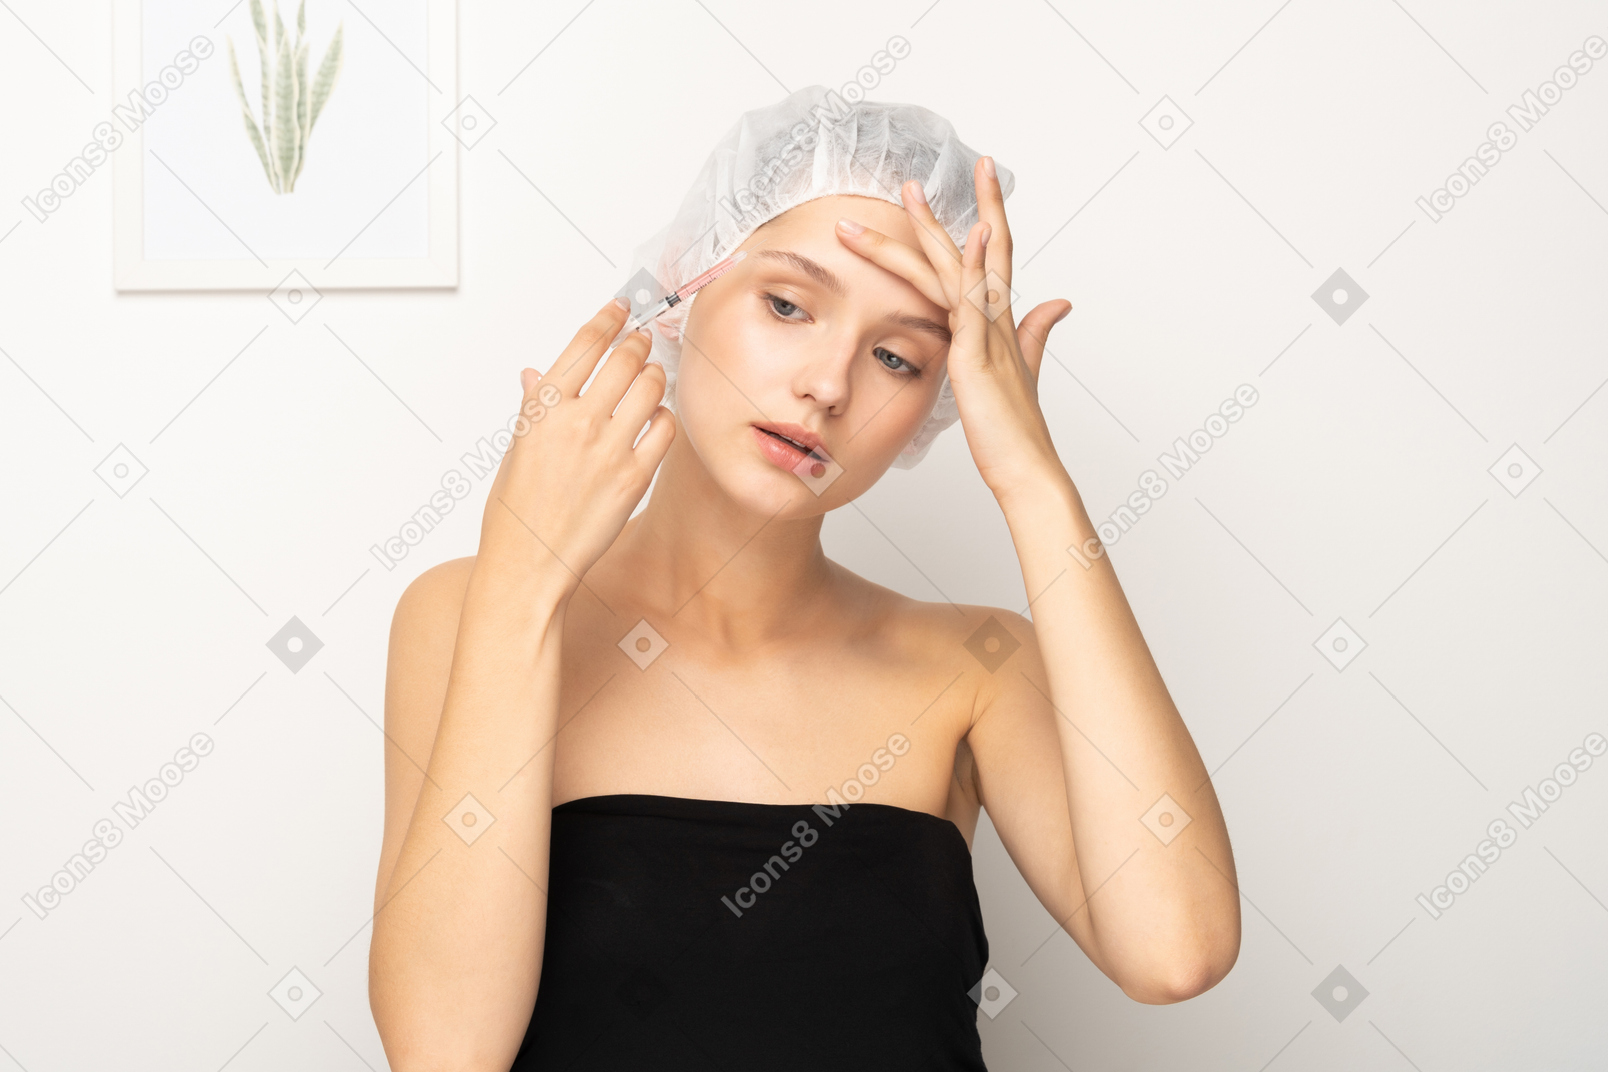 Woman making injection to her forehead